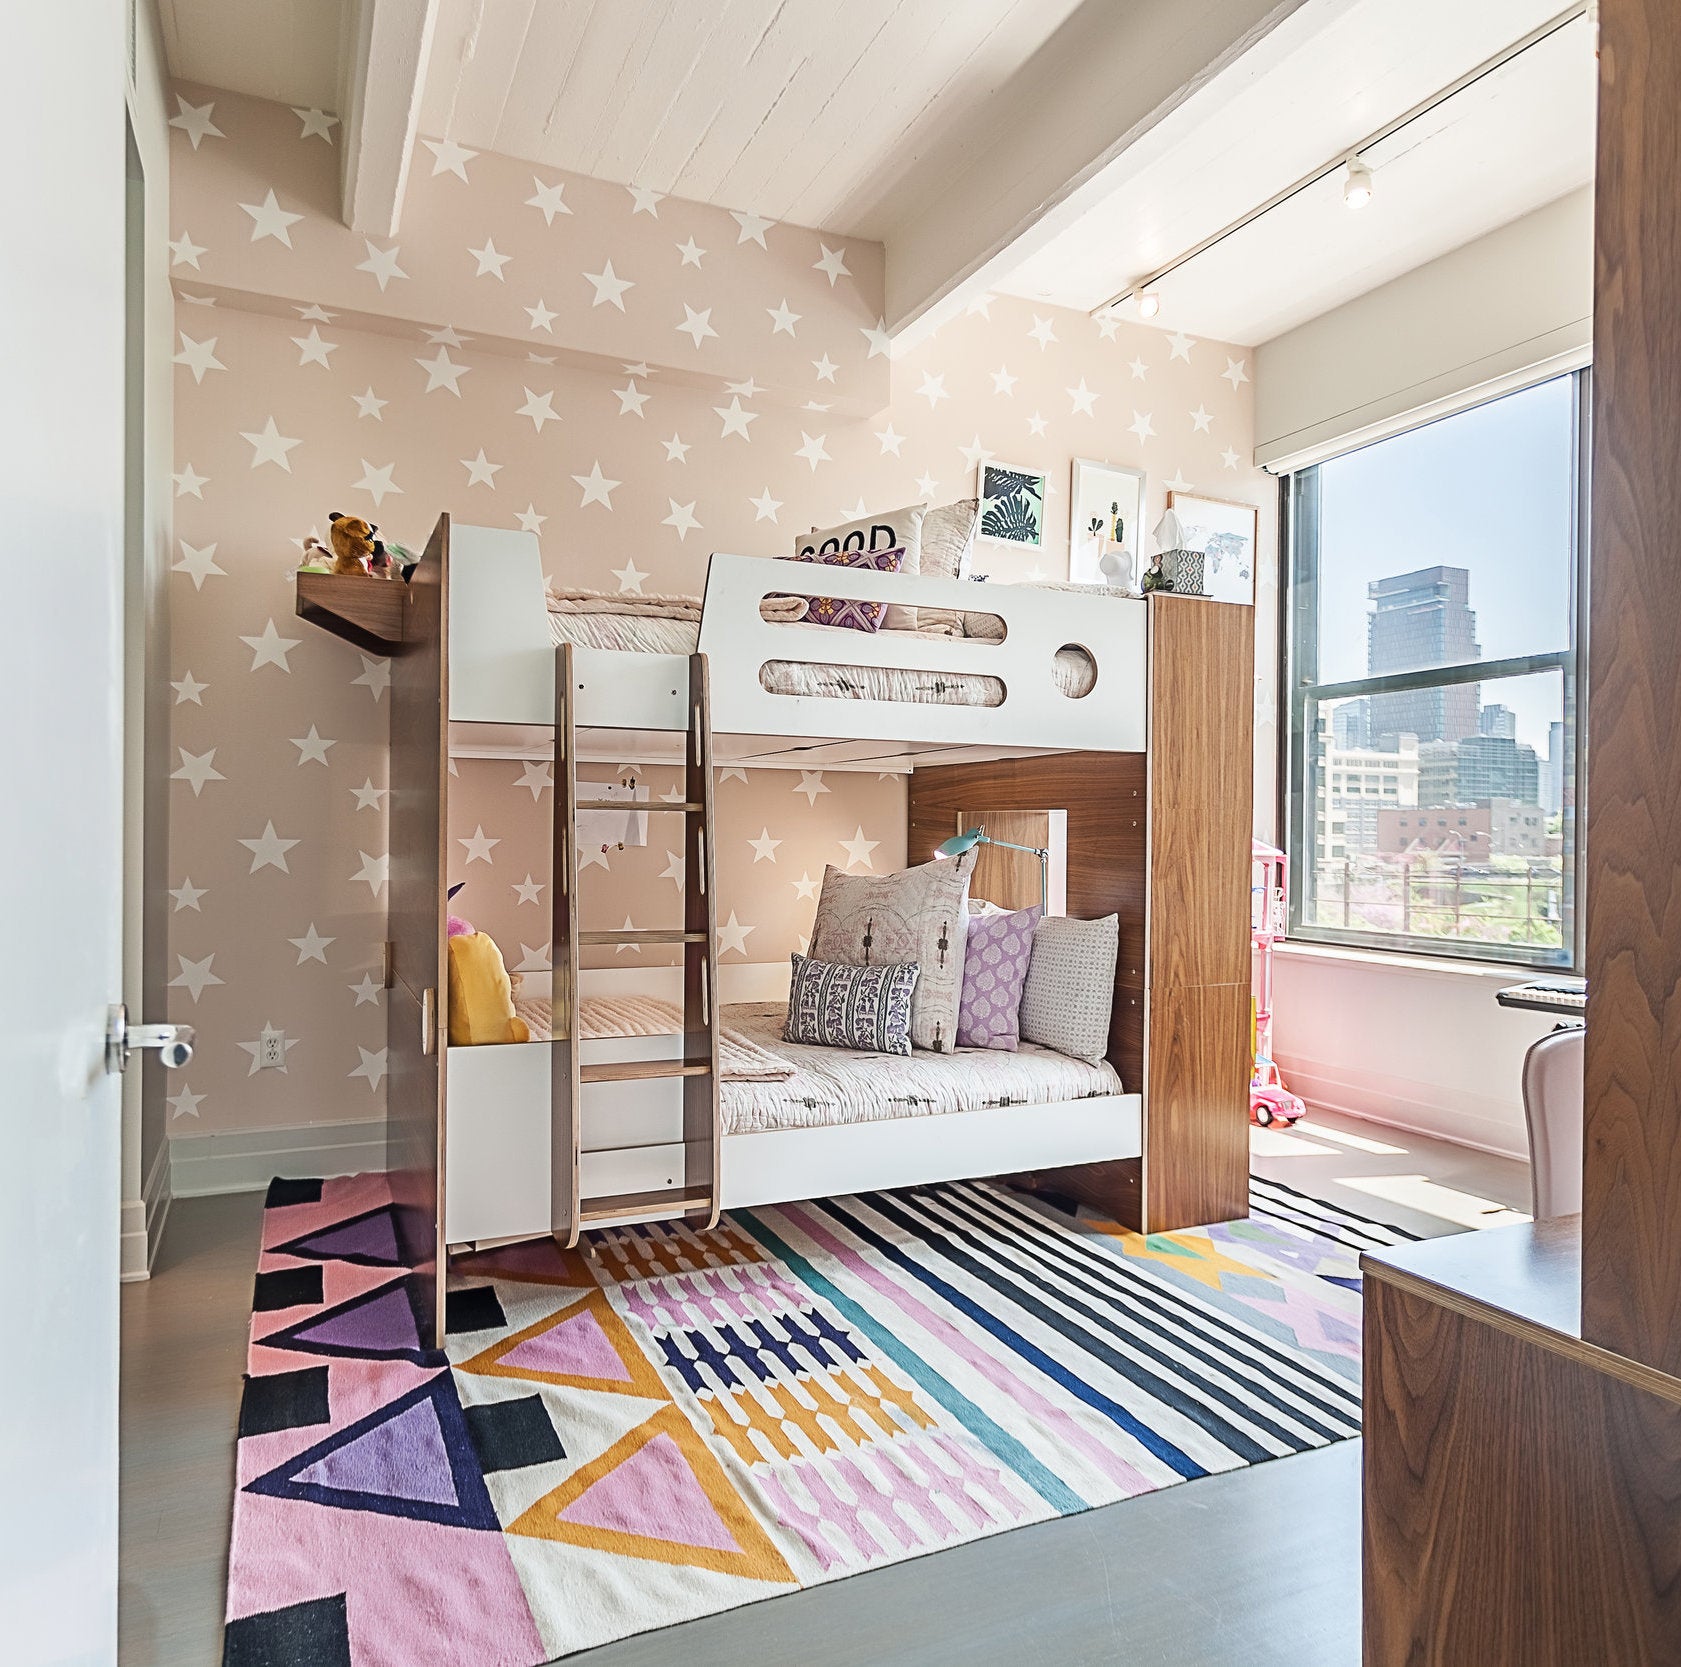 Bright children's room with bunk beds, star-patterned wallpaper, colorful rug, and city view window.